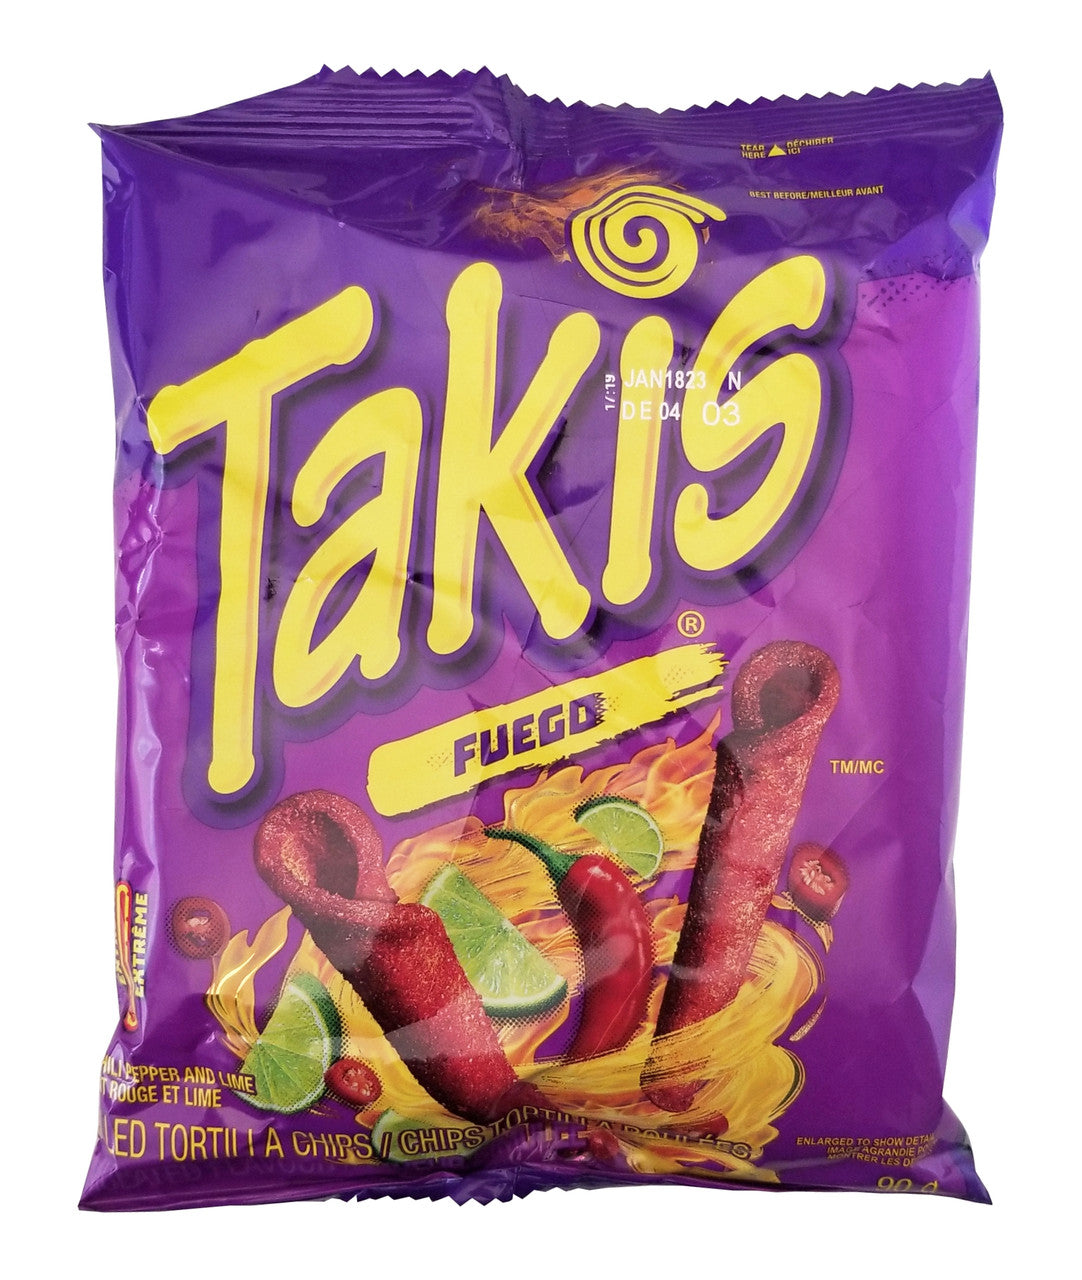 TAKIS Fuego Chili Pepper & Lime Rolled Tortilla Chips, 90g/3.15 oz. Bag {Imported from Canada}